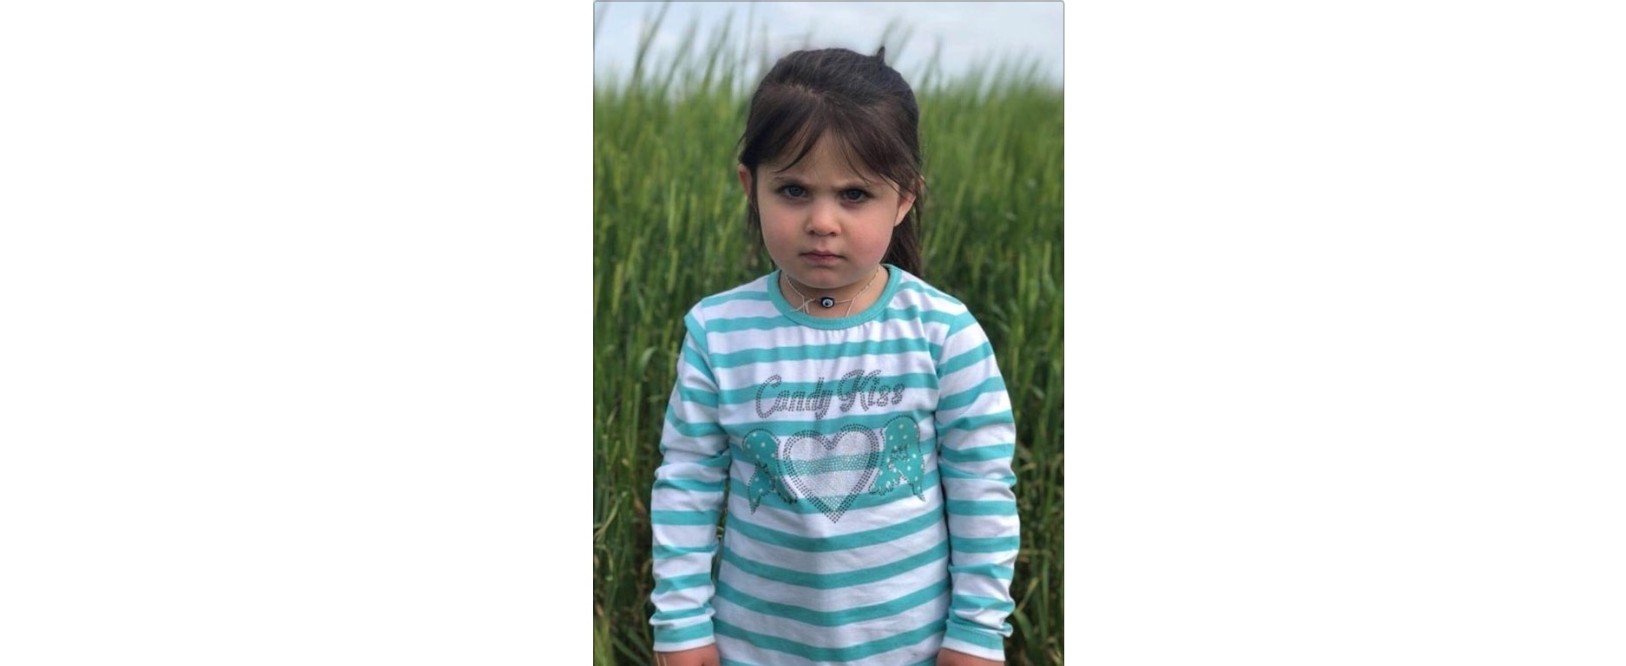 Four-year-old Leyla Aydemir went missing on Friday, June 15.